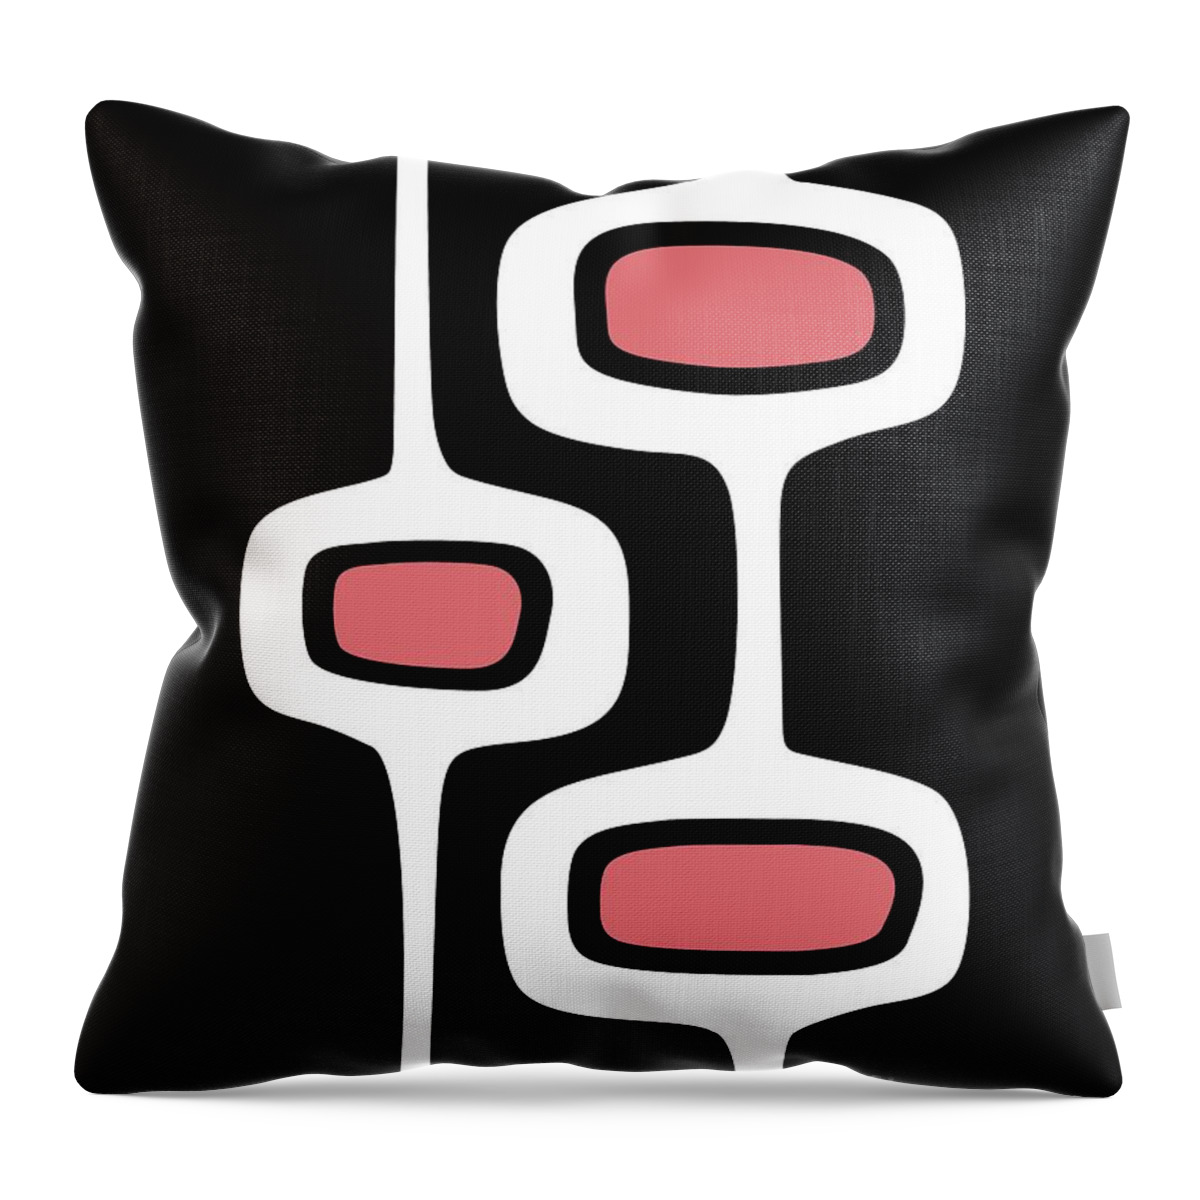  Throw Pillow featuring the digital art Mod Pods Two in Pink by Donna Mibus